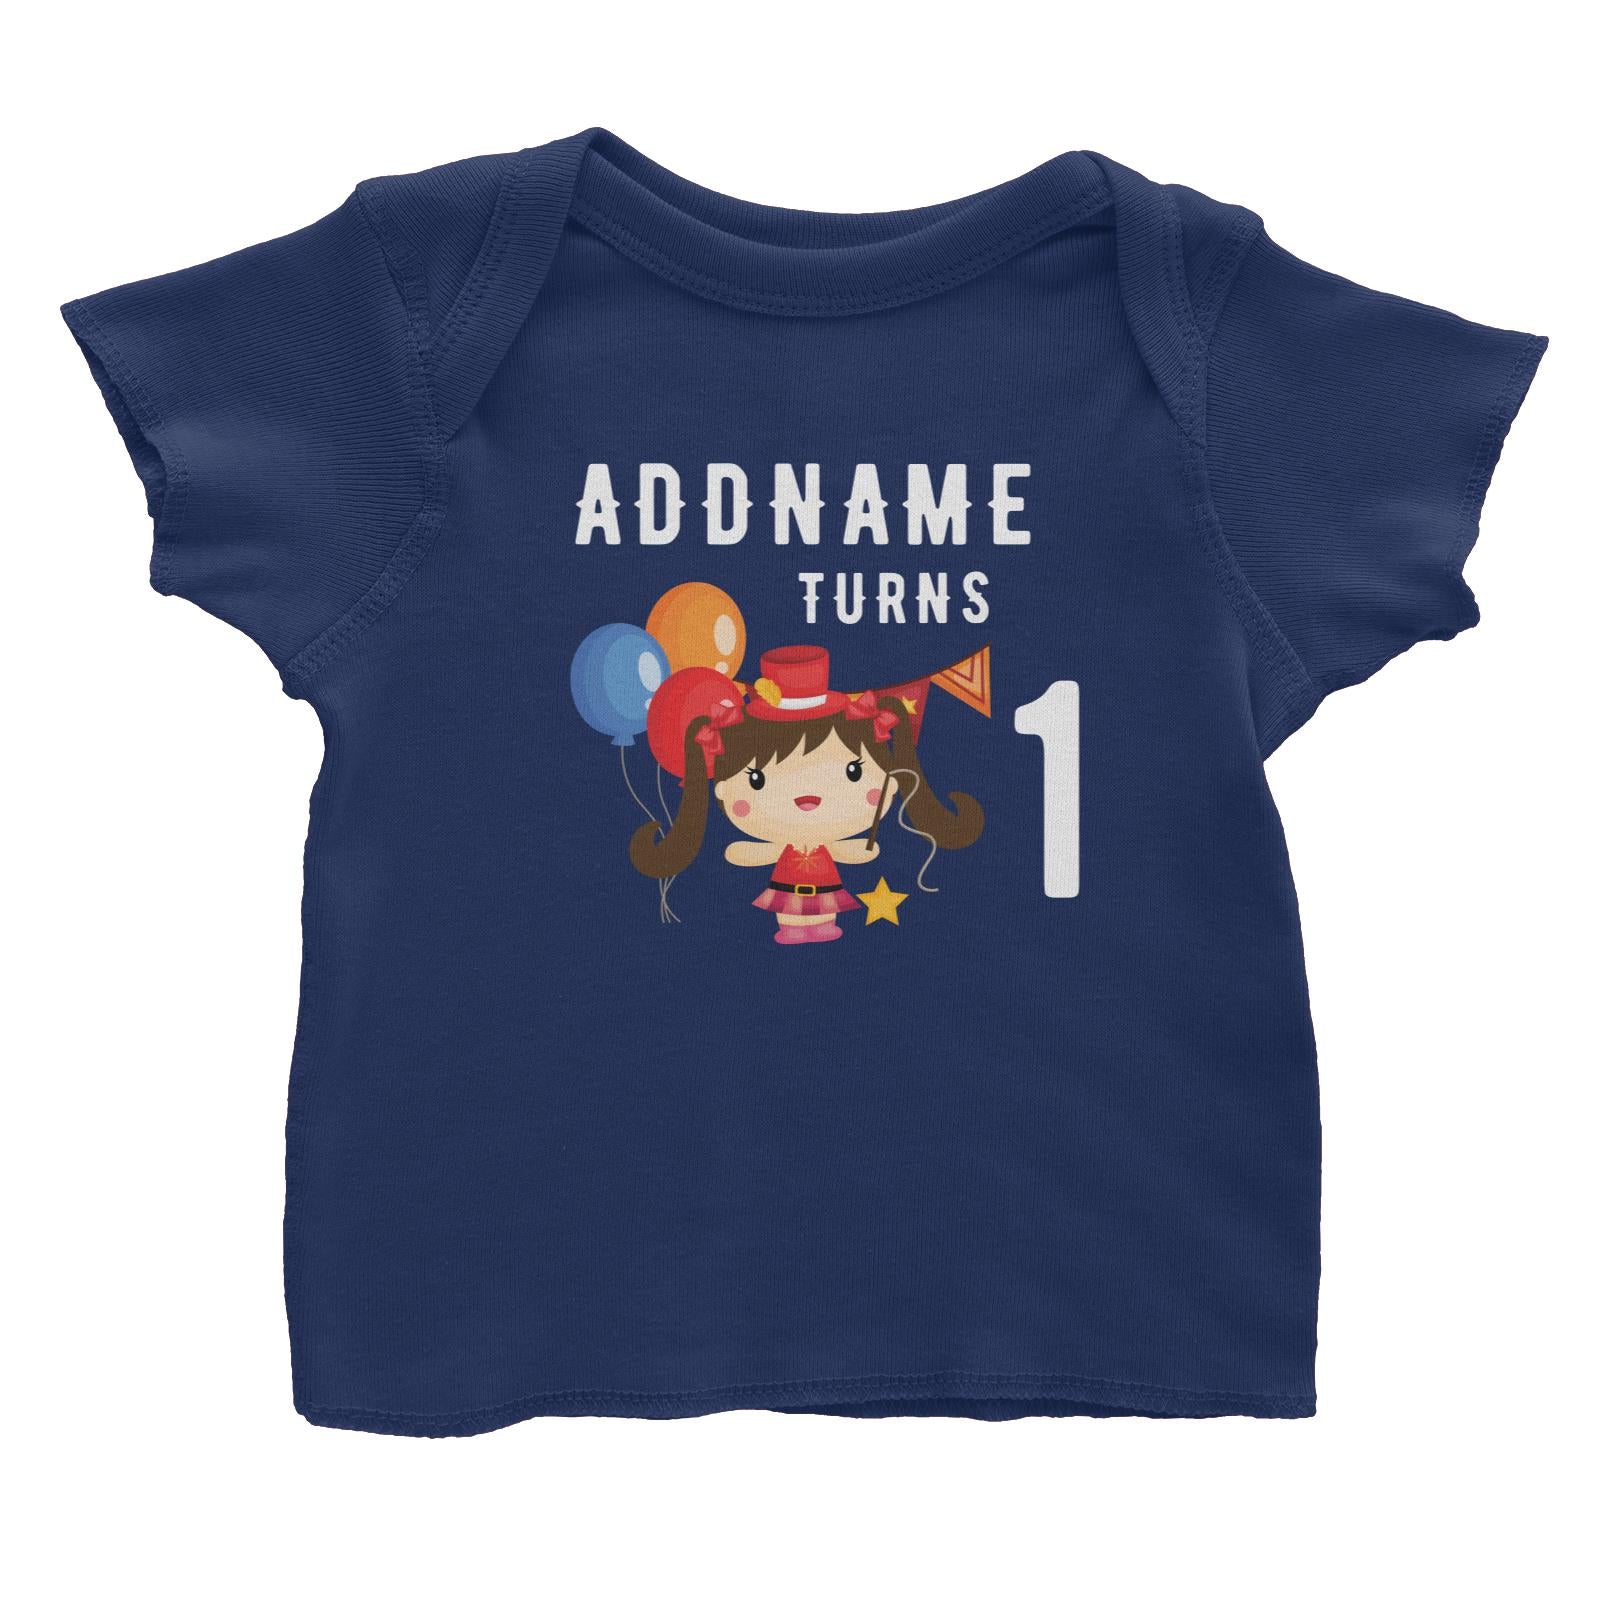 Birthday Circus Happy Girl Leader of Performance Addname Turns 1 Baby T-Shirt